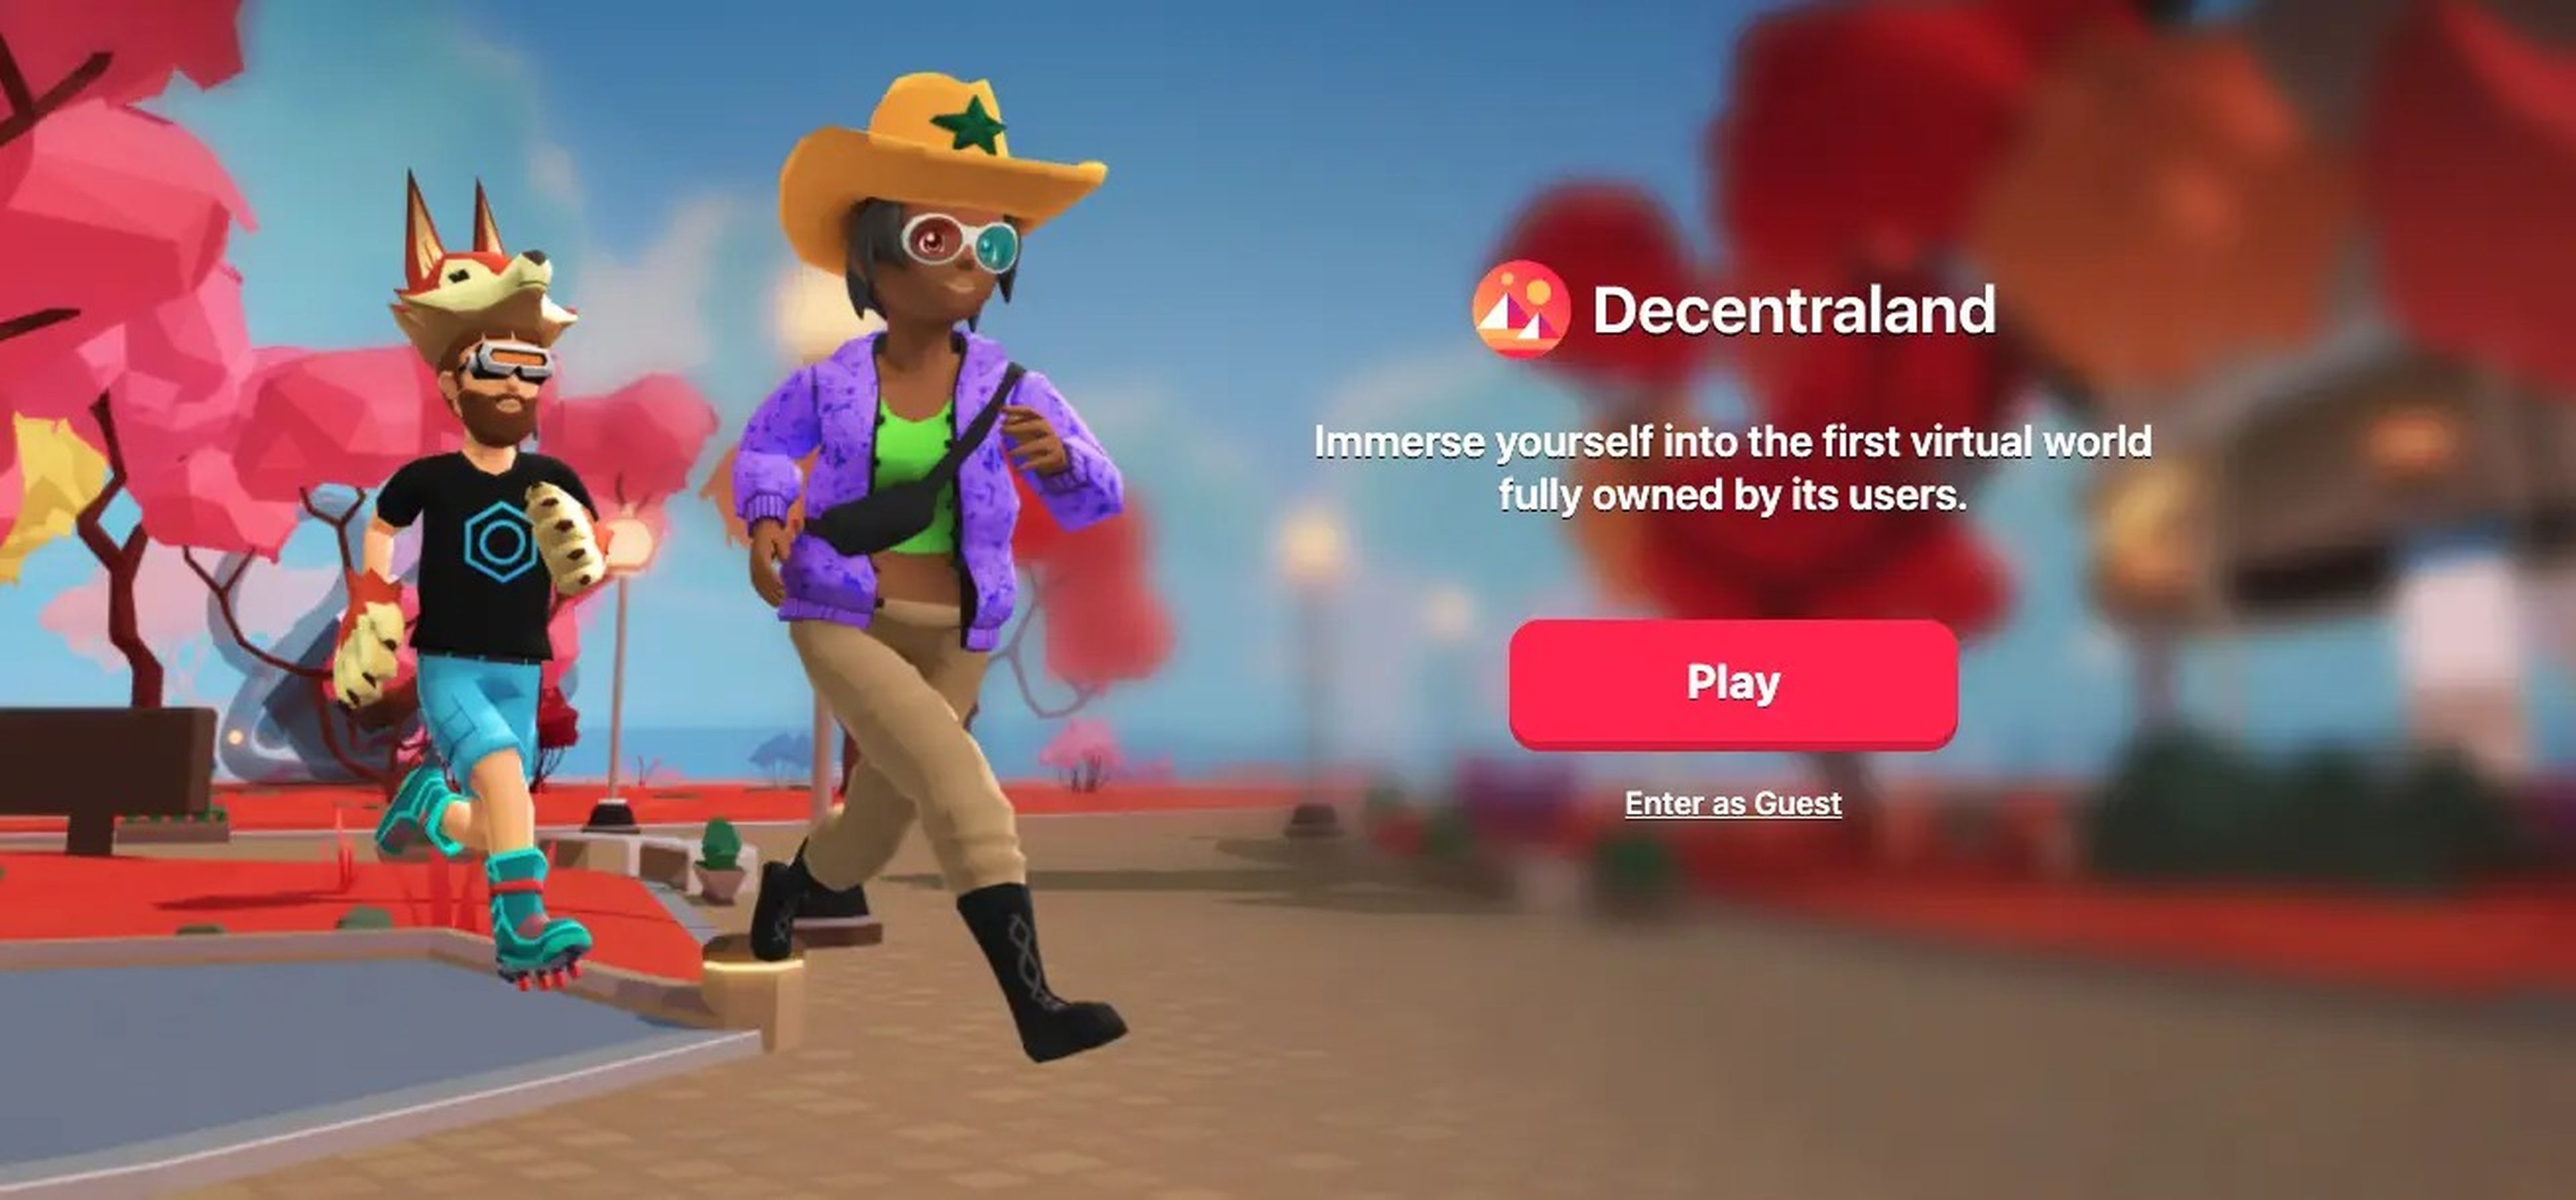 Decentraland allows users to buy and sell virtual real estate.